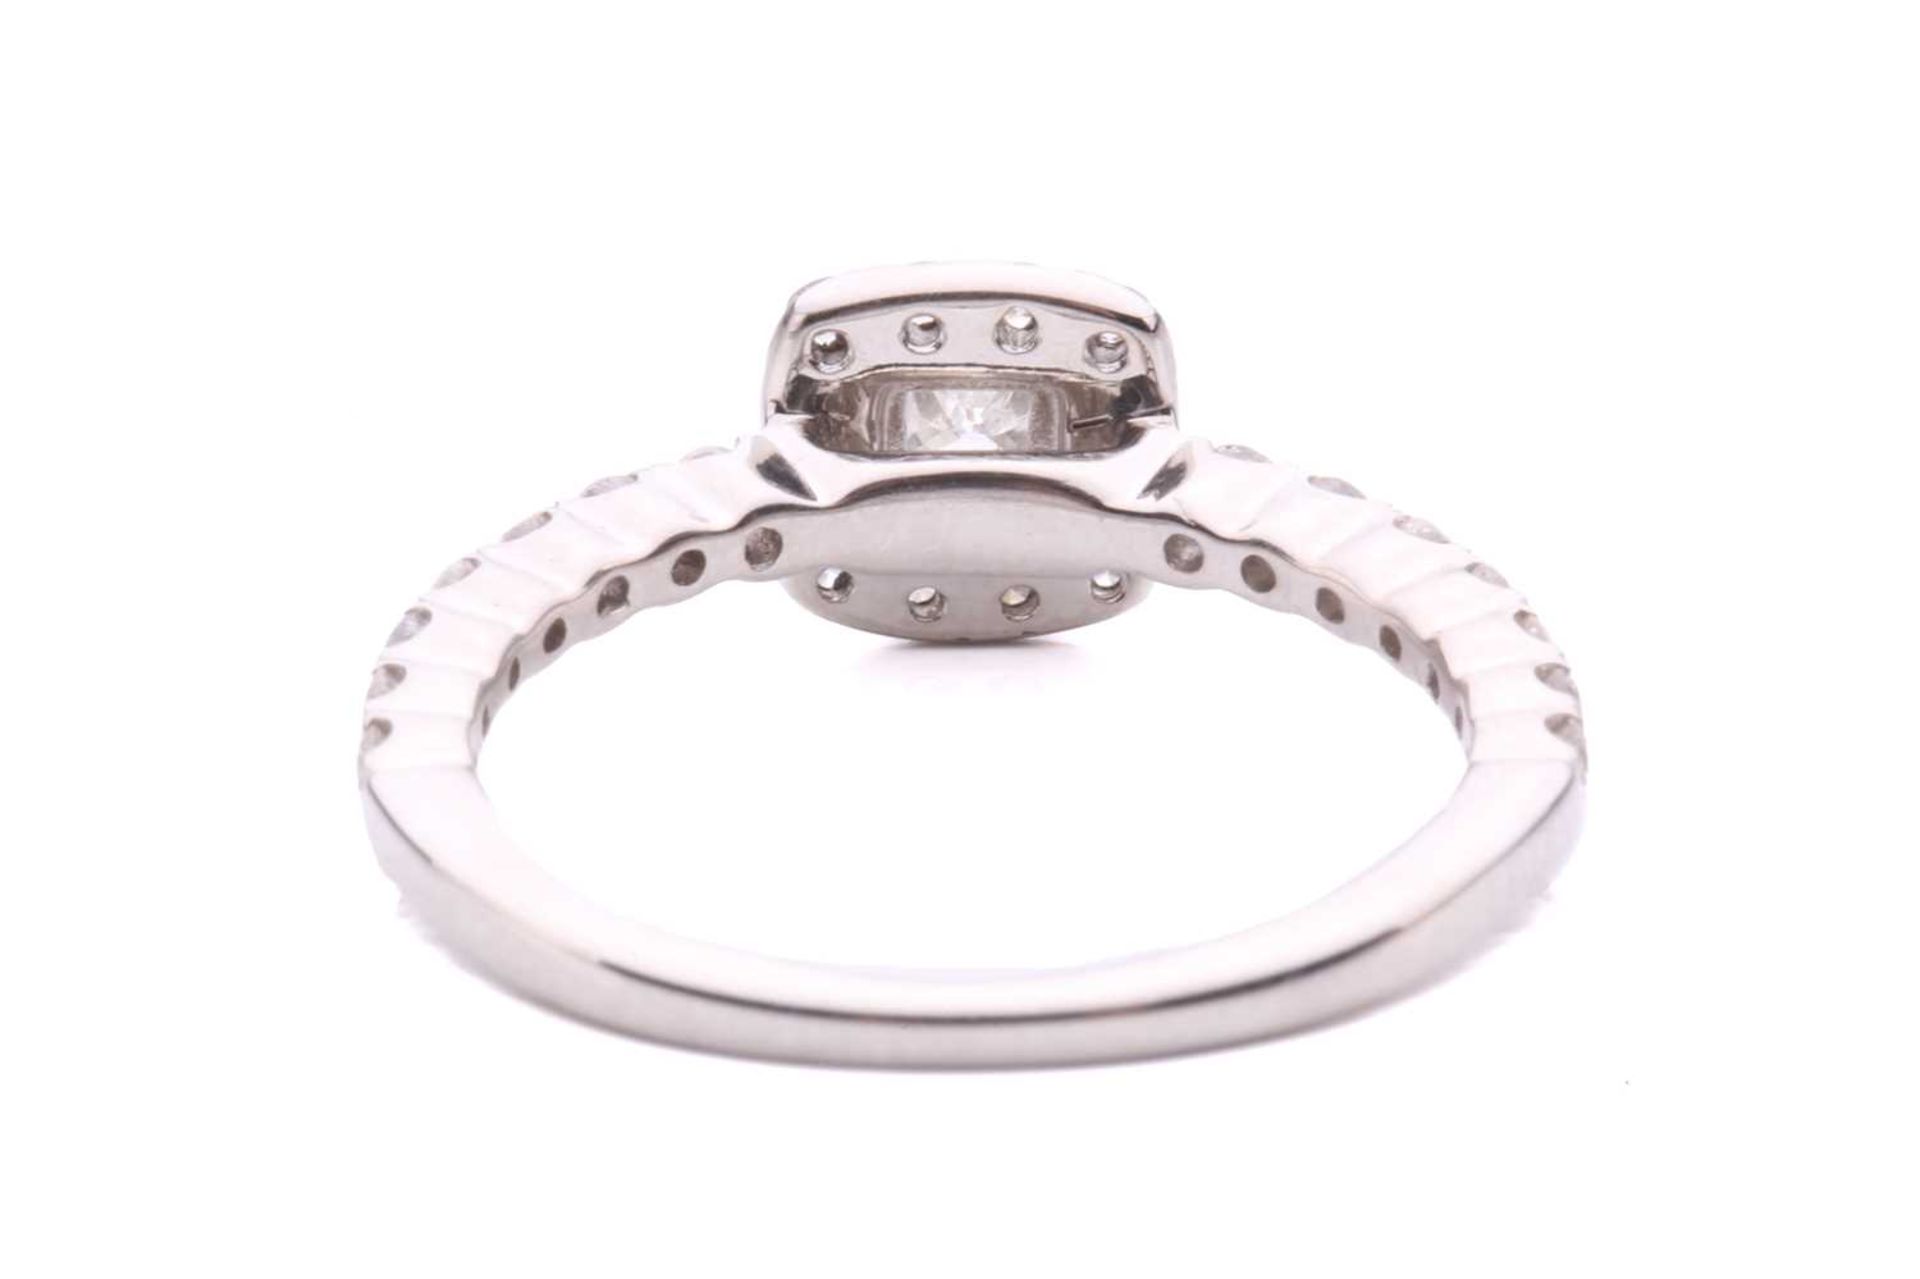 A princess-cut diamond halo ring, with a central claw set princess-cut diamond measuring 3.6x3.3mm - Image 3 of 5